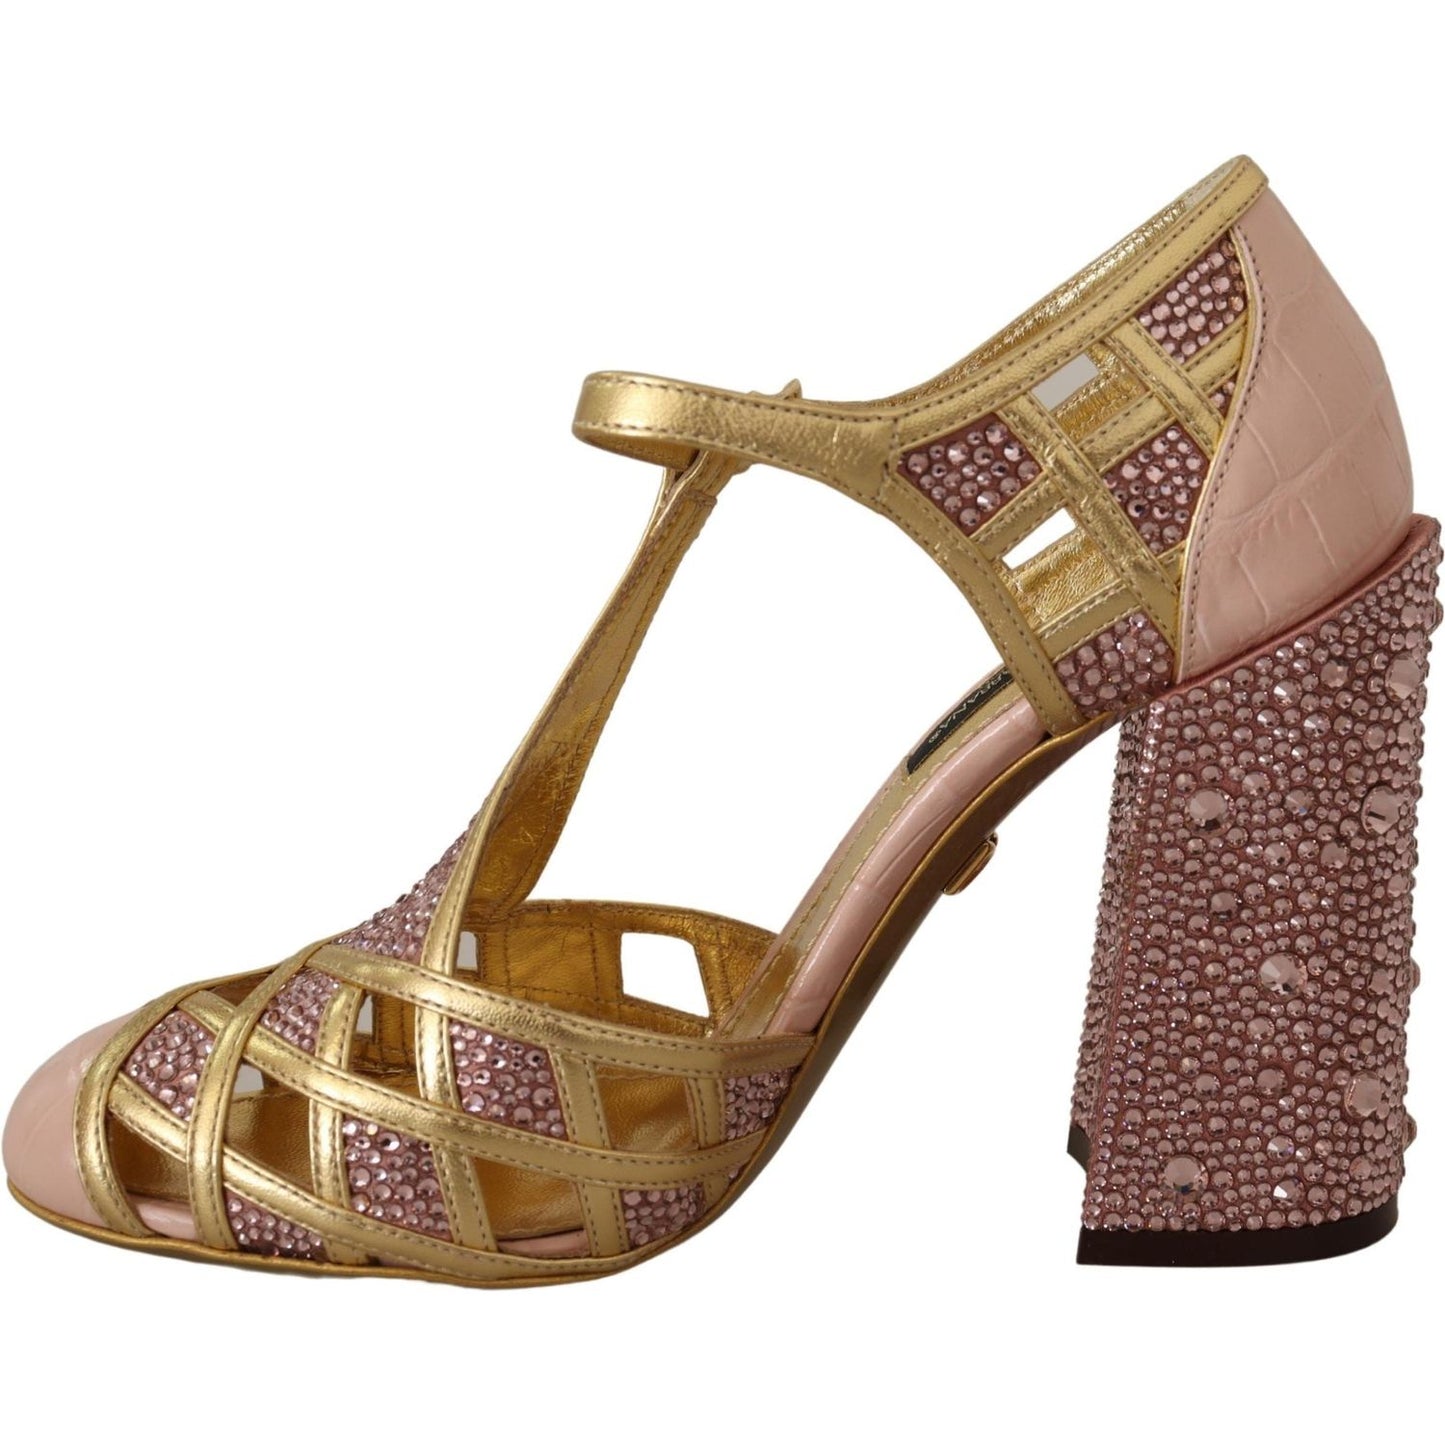 Dolce & Gabbana Silk-Infused Leather Crystal Pumps in Pink Gold pink-gold-leather-crystal-pumps-t-strap-shoes